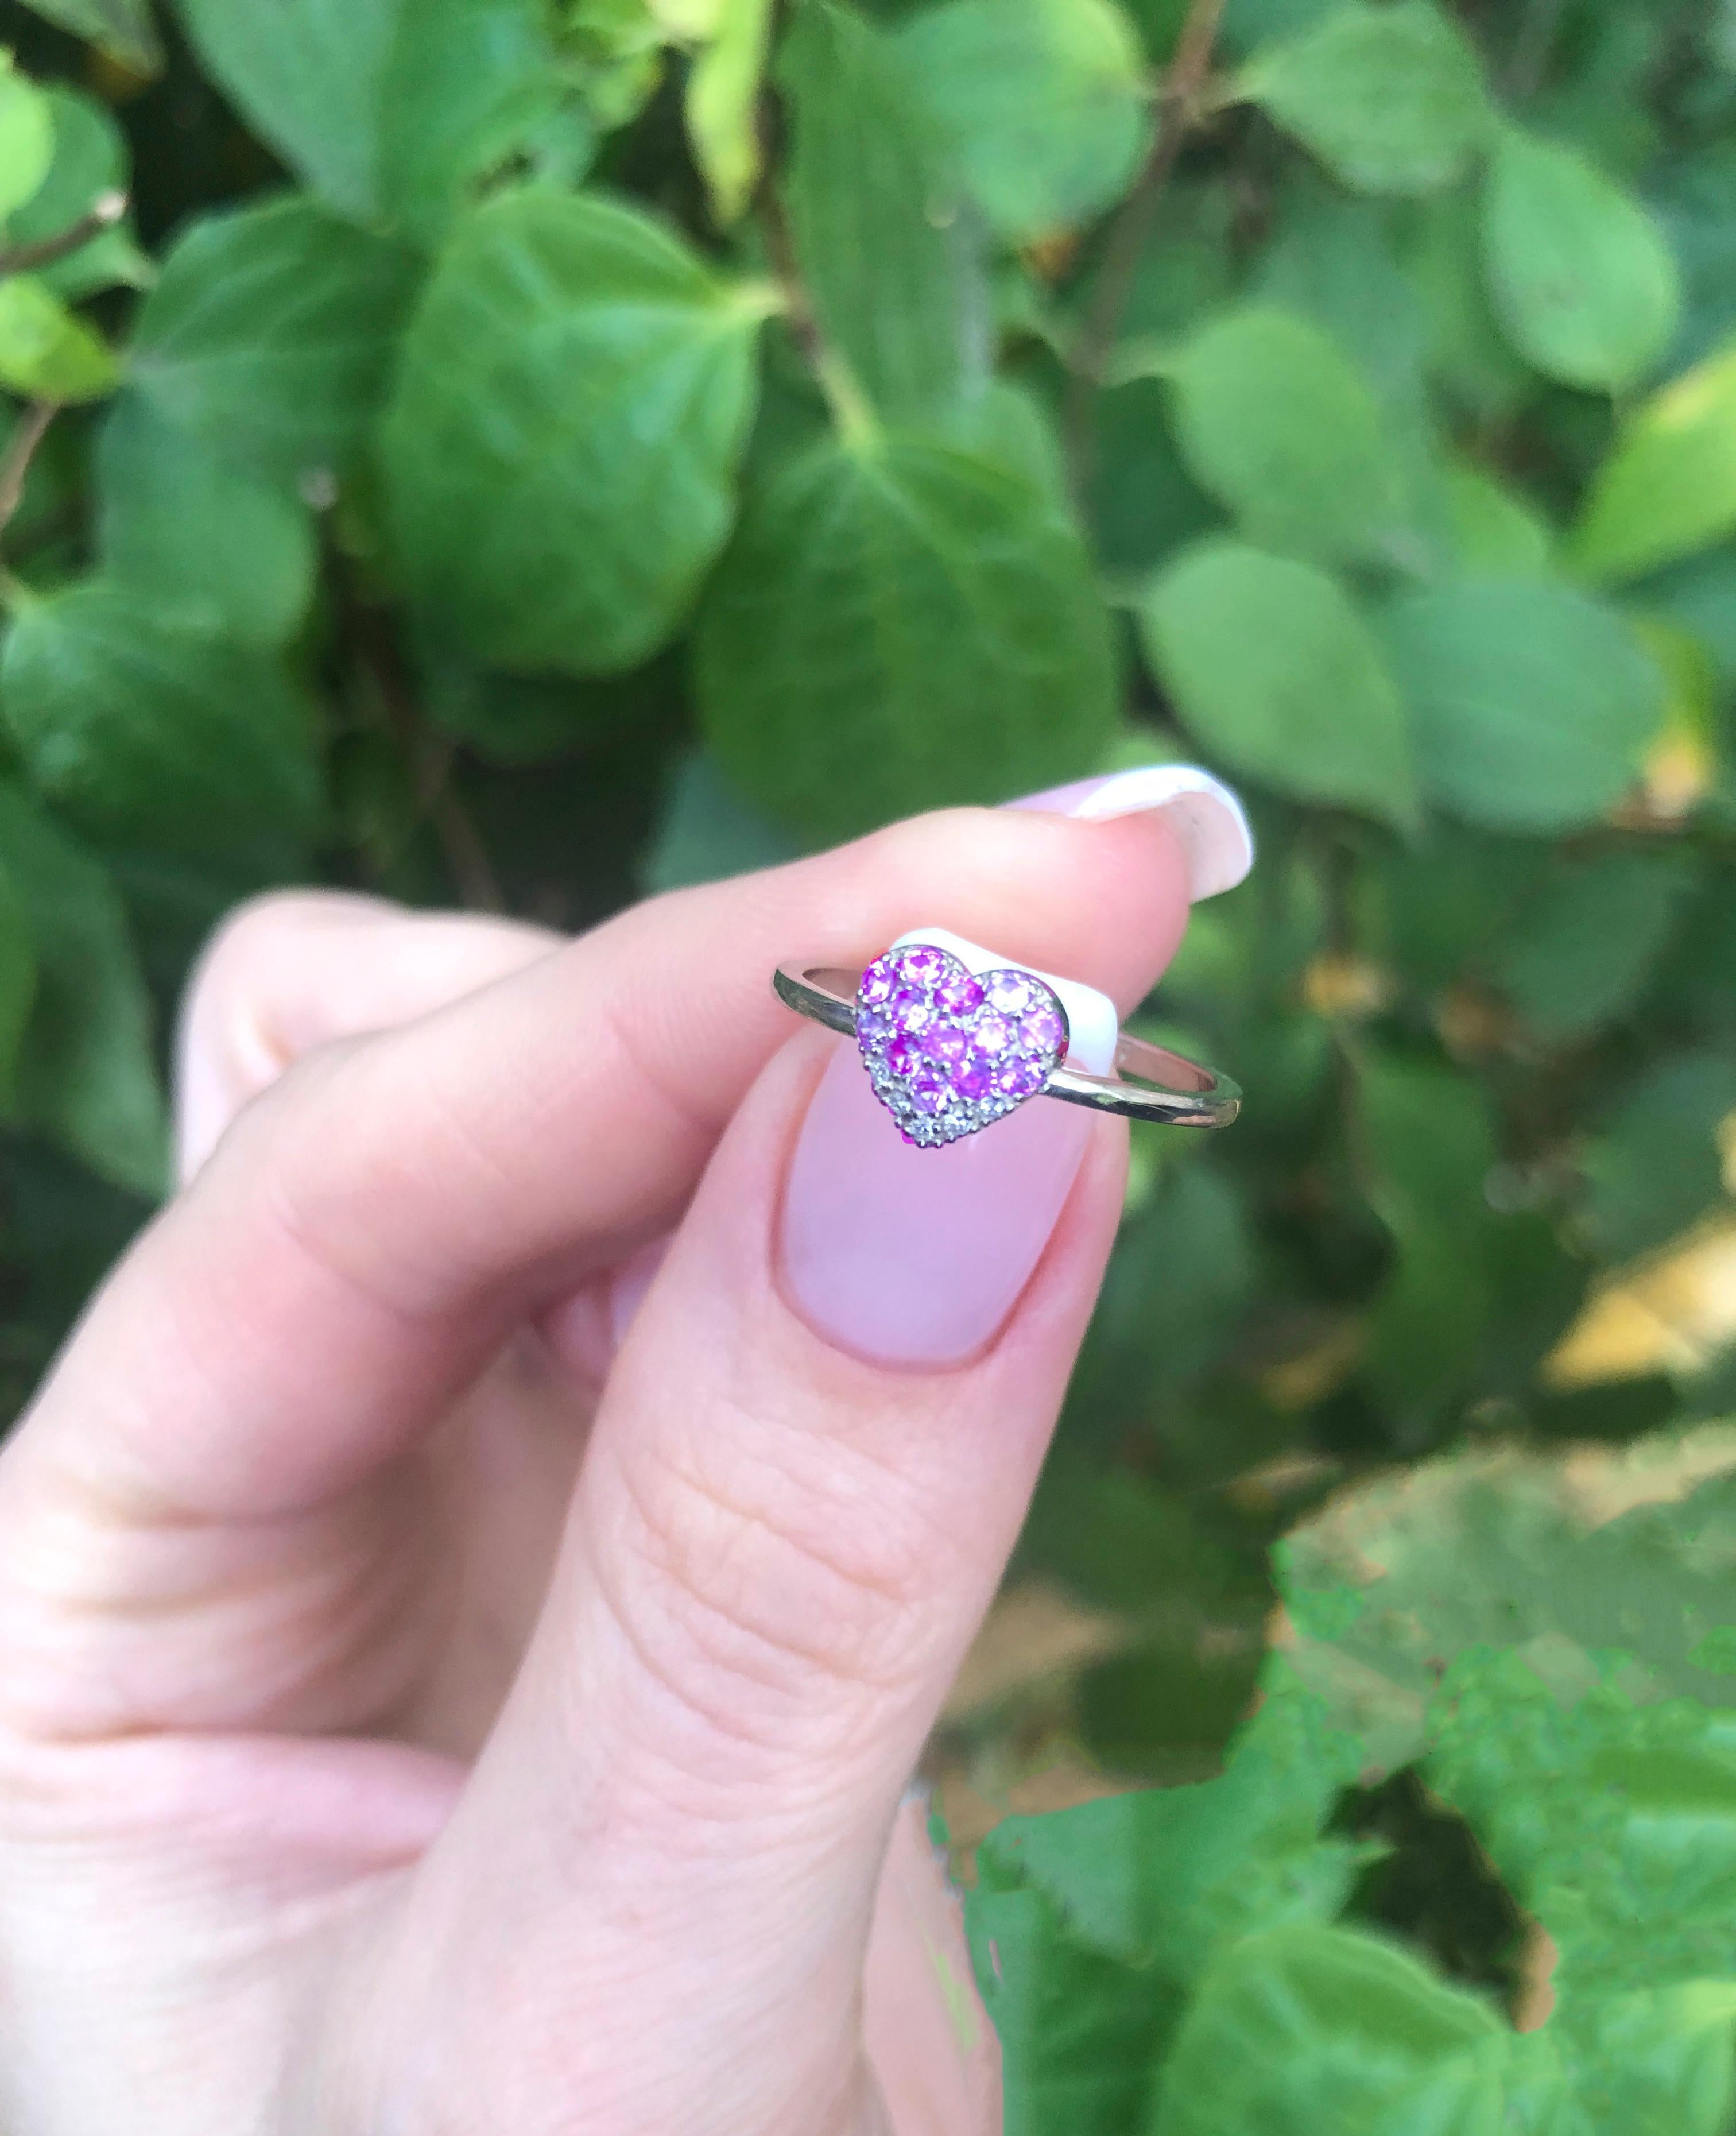 For Sale:  Heart Shaped Gold Ring with Pink Sapphires 10